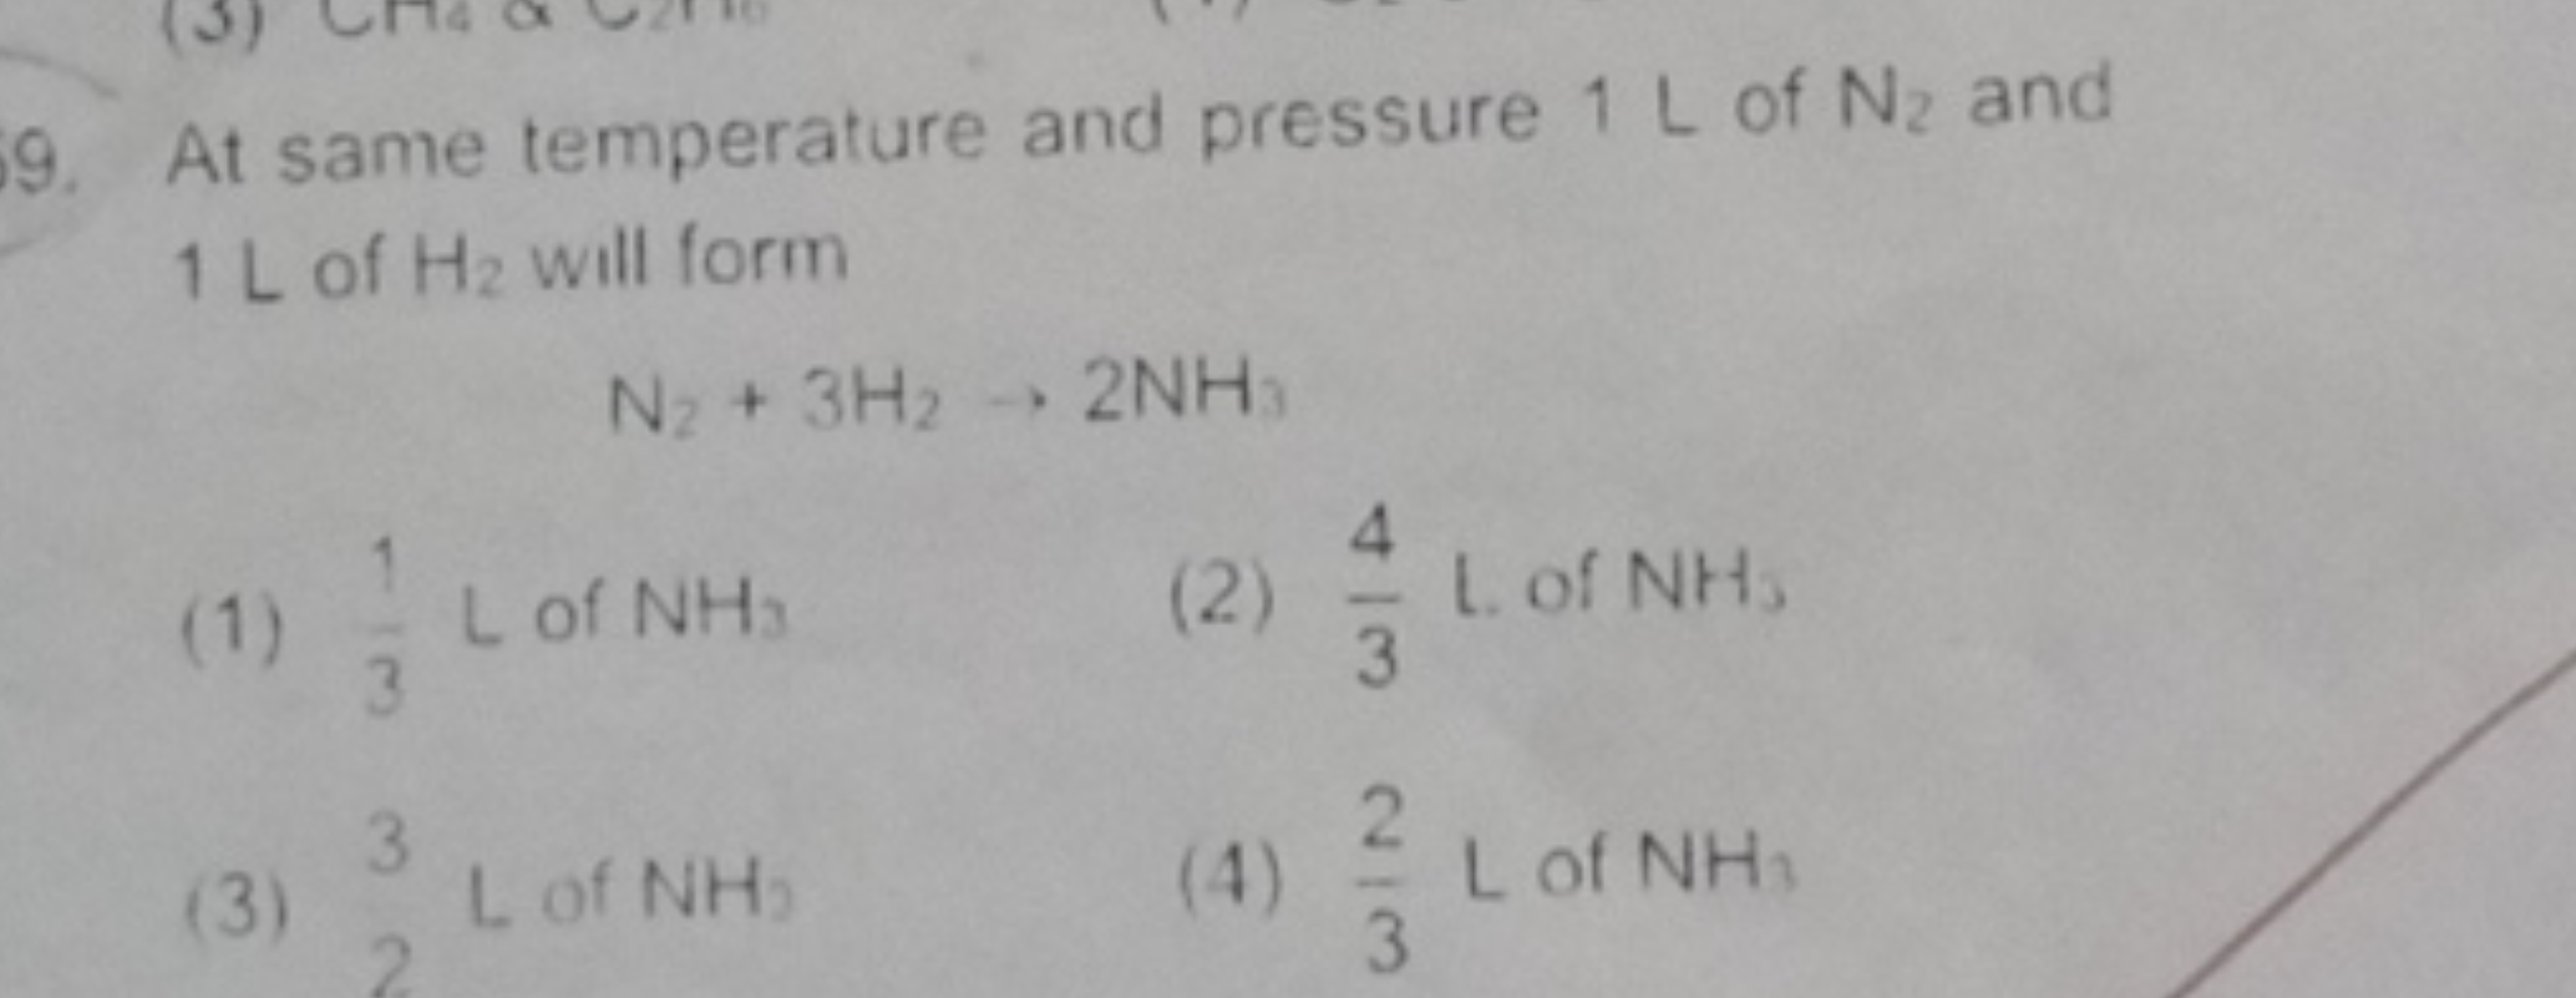 9. At same temperature and pressure 1 L of N2​ and 1 L of H2​ will for